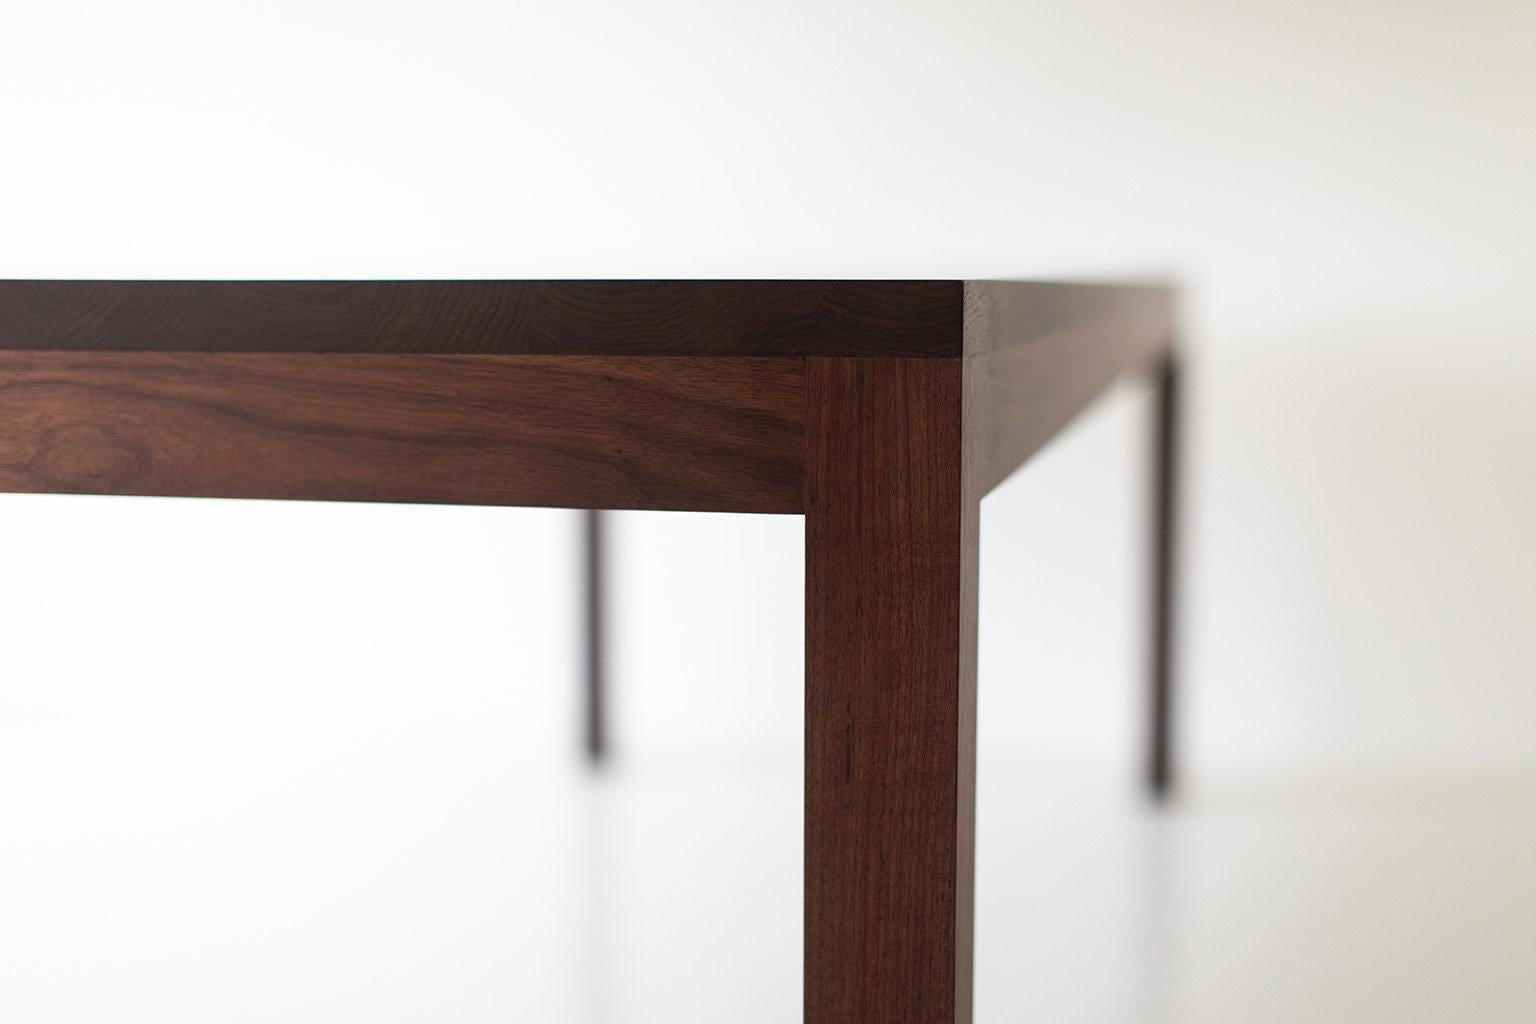 Modern walnut dining table for Bertu Home.

This modern walnut dining table is made in the heart of Ohio with locally sourced wood. We use the table both as a modern dining table or desk. Each table is hand-made with solid walnut and finished with